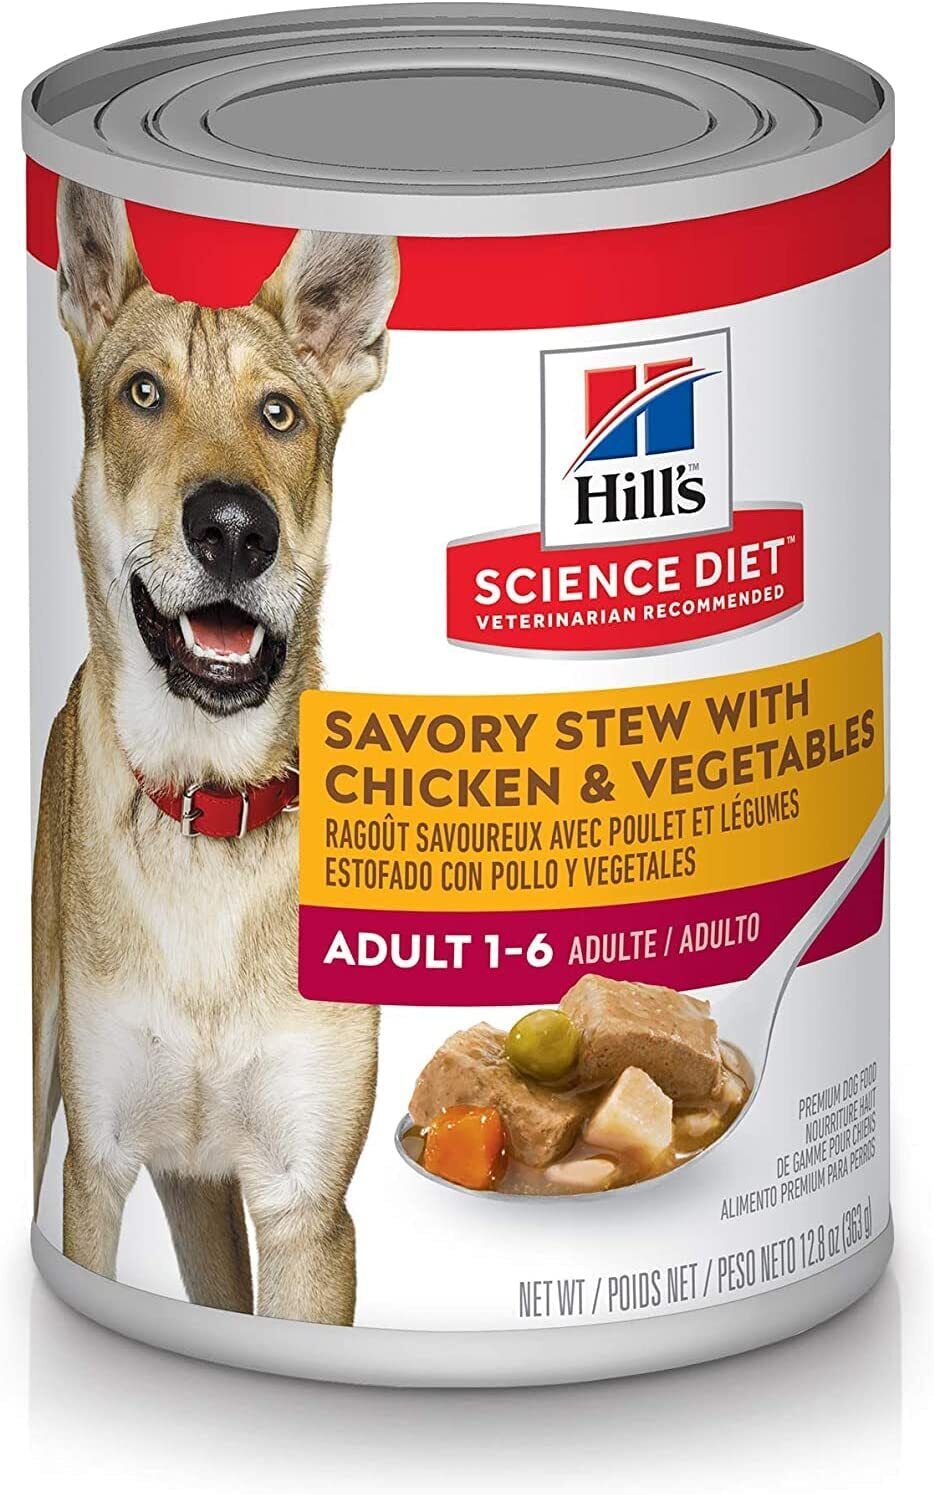 Hill's Science Diet Adult 1-6 Wet Dog Food, Chicken or Beef, 13 oz, 12 Cans